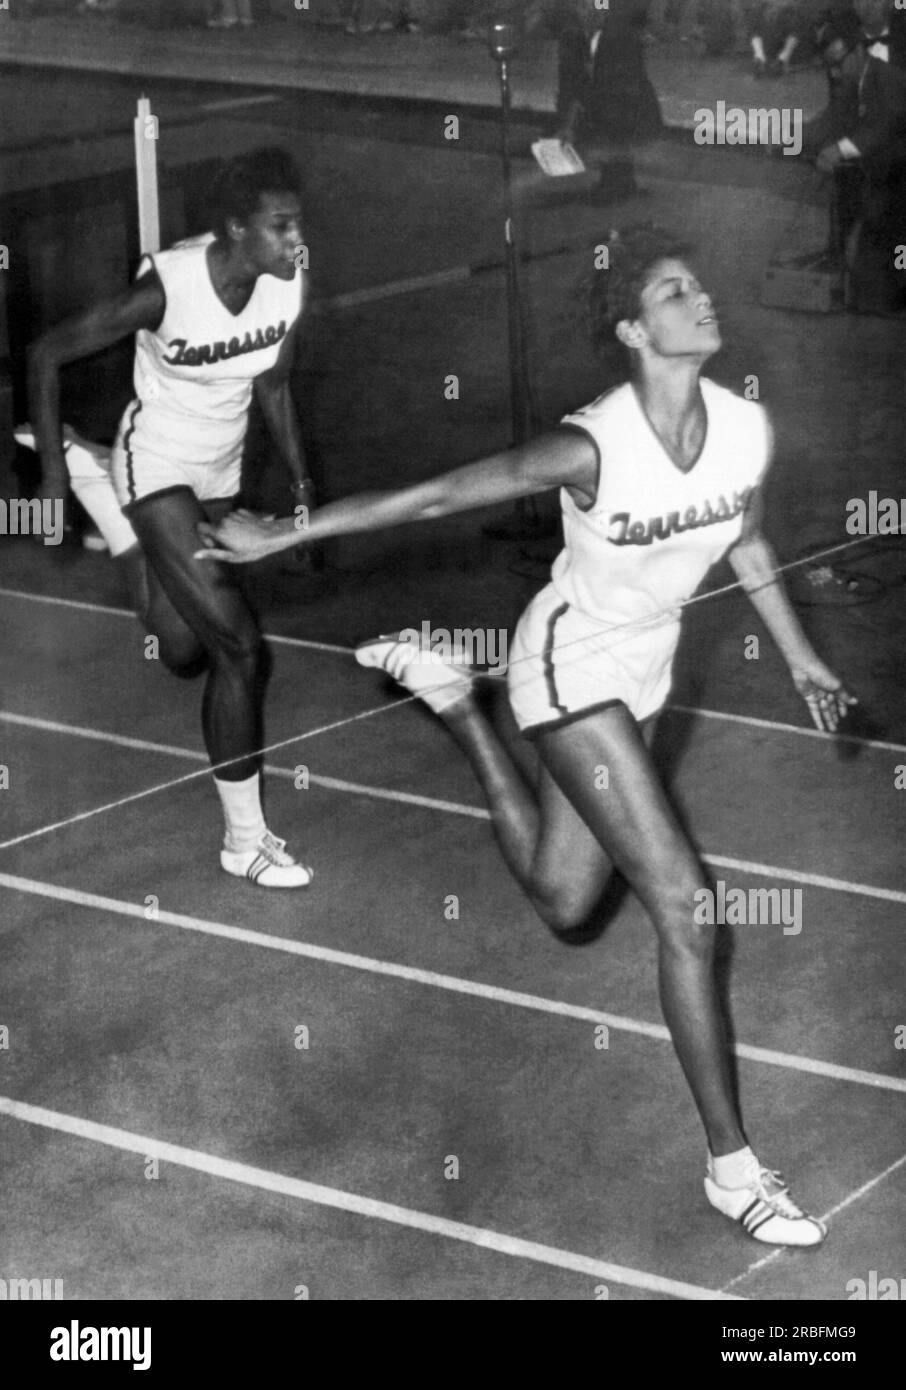 New York, New York:  February 3, 1961 Tennessee State track star and winner of three Olympic gold medals Wilma Rudolph ties her 60 yard world indoor record at the Millrose Games in Madison Square Garden. Tennessee teammate Vivian Brown is second. Stock Photo